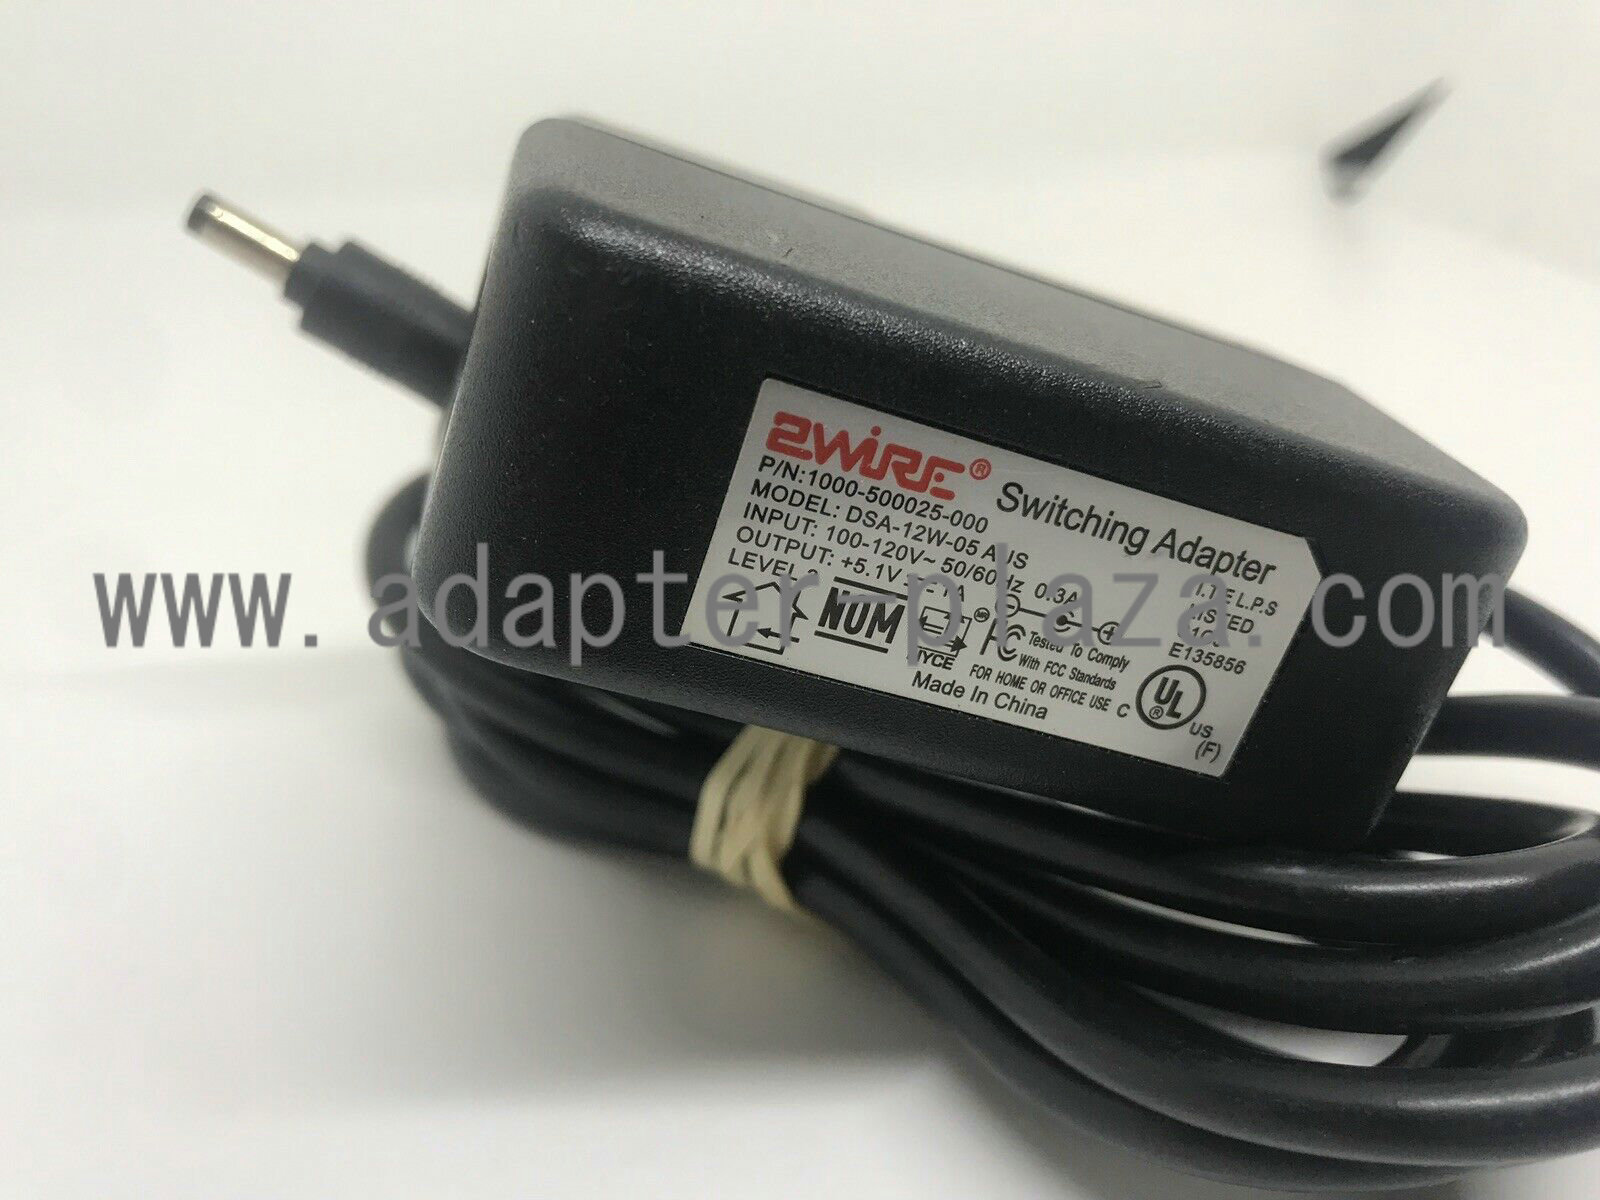 Brand new 2Wire DSA-12W-05 1000-500025-000 5.1V 1A AC DC Power Supply Adapter Charger